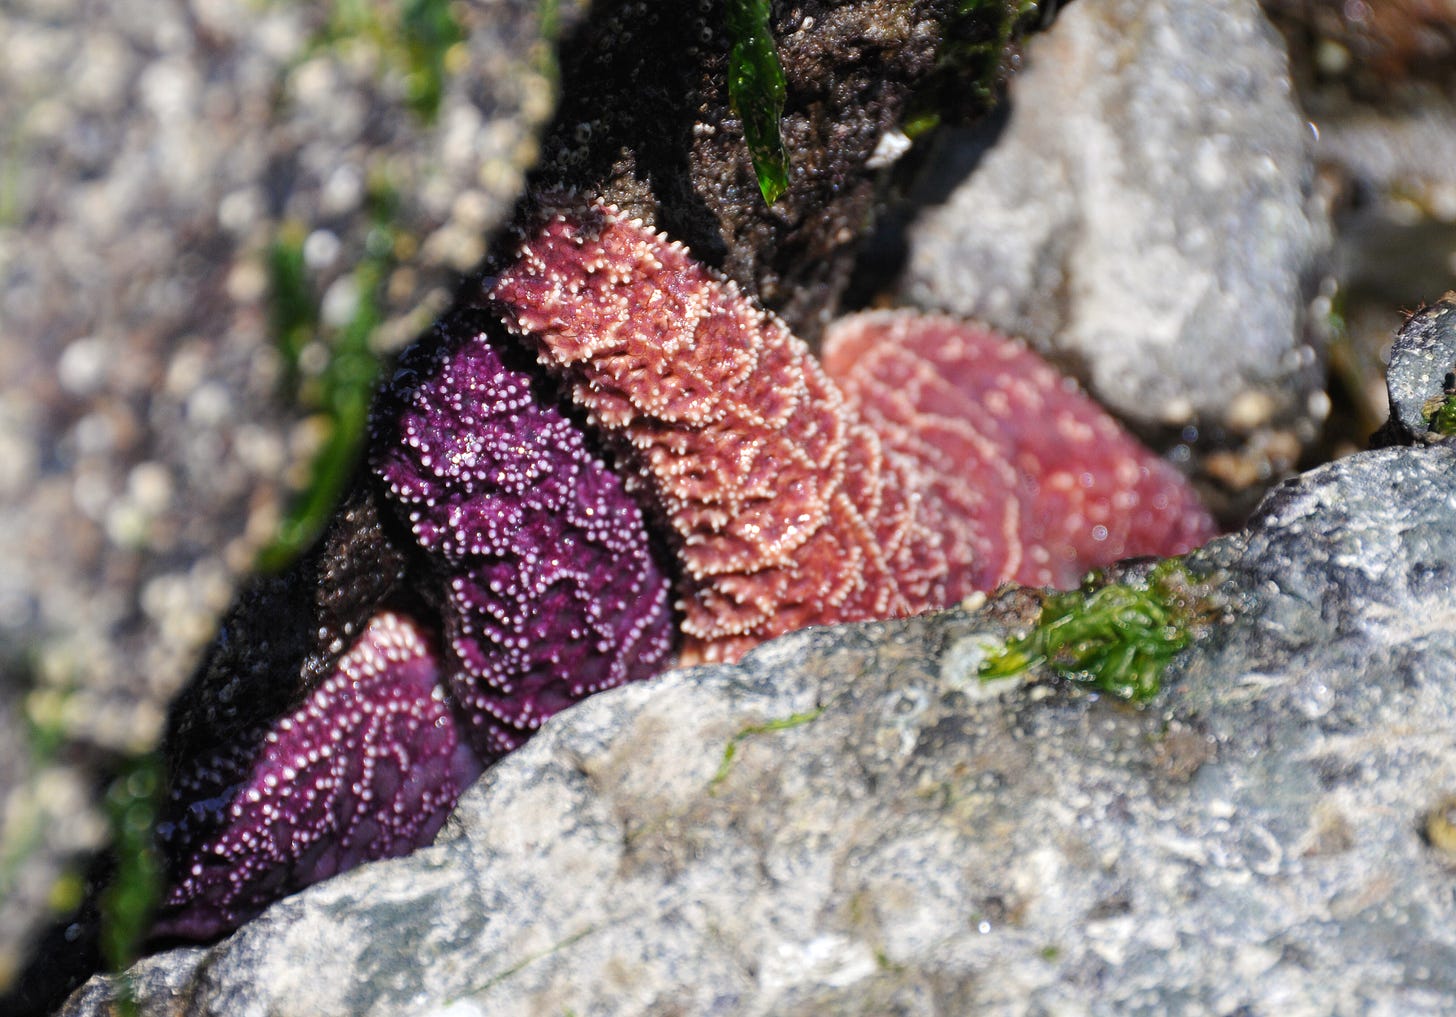 Two starfish squished between rocks